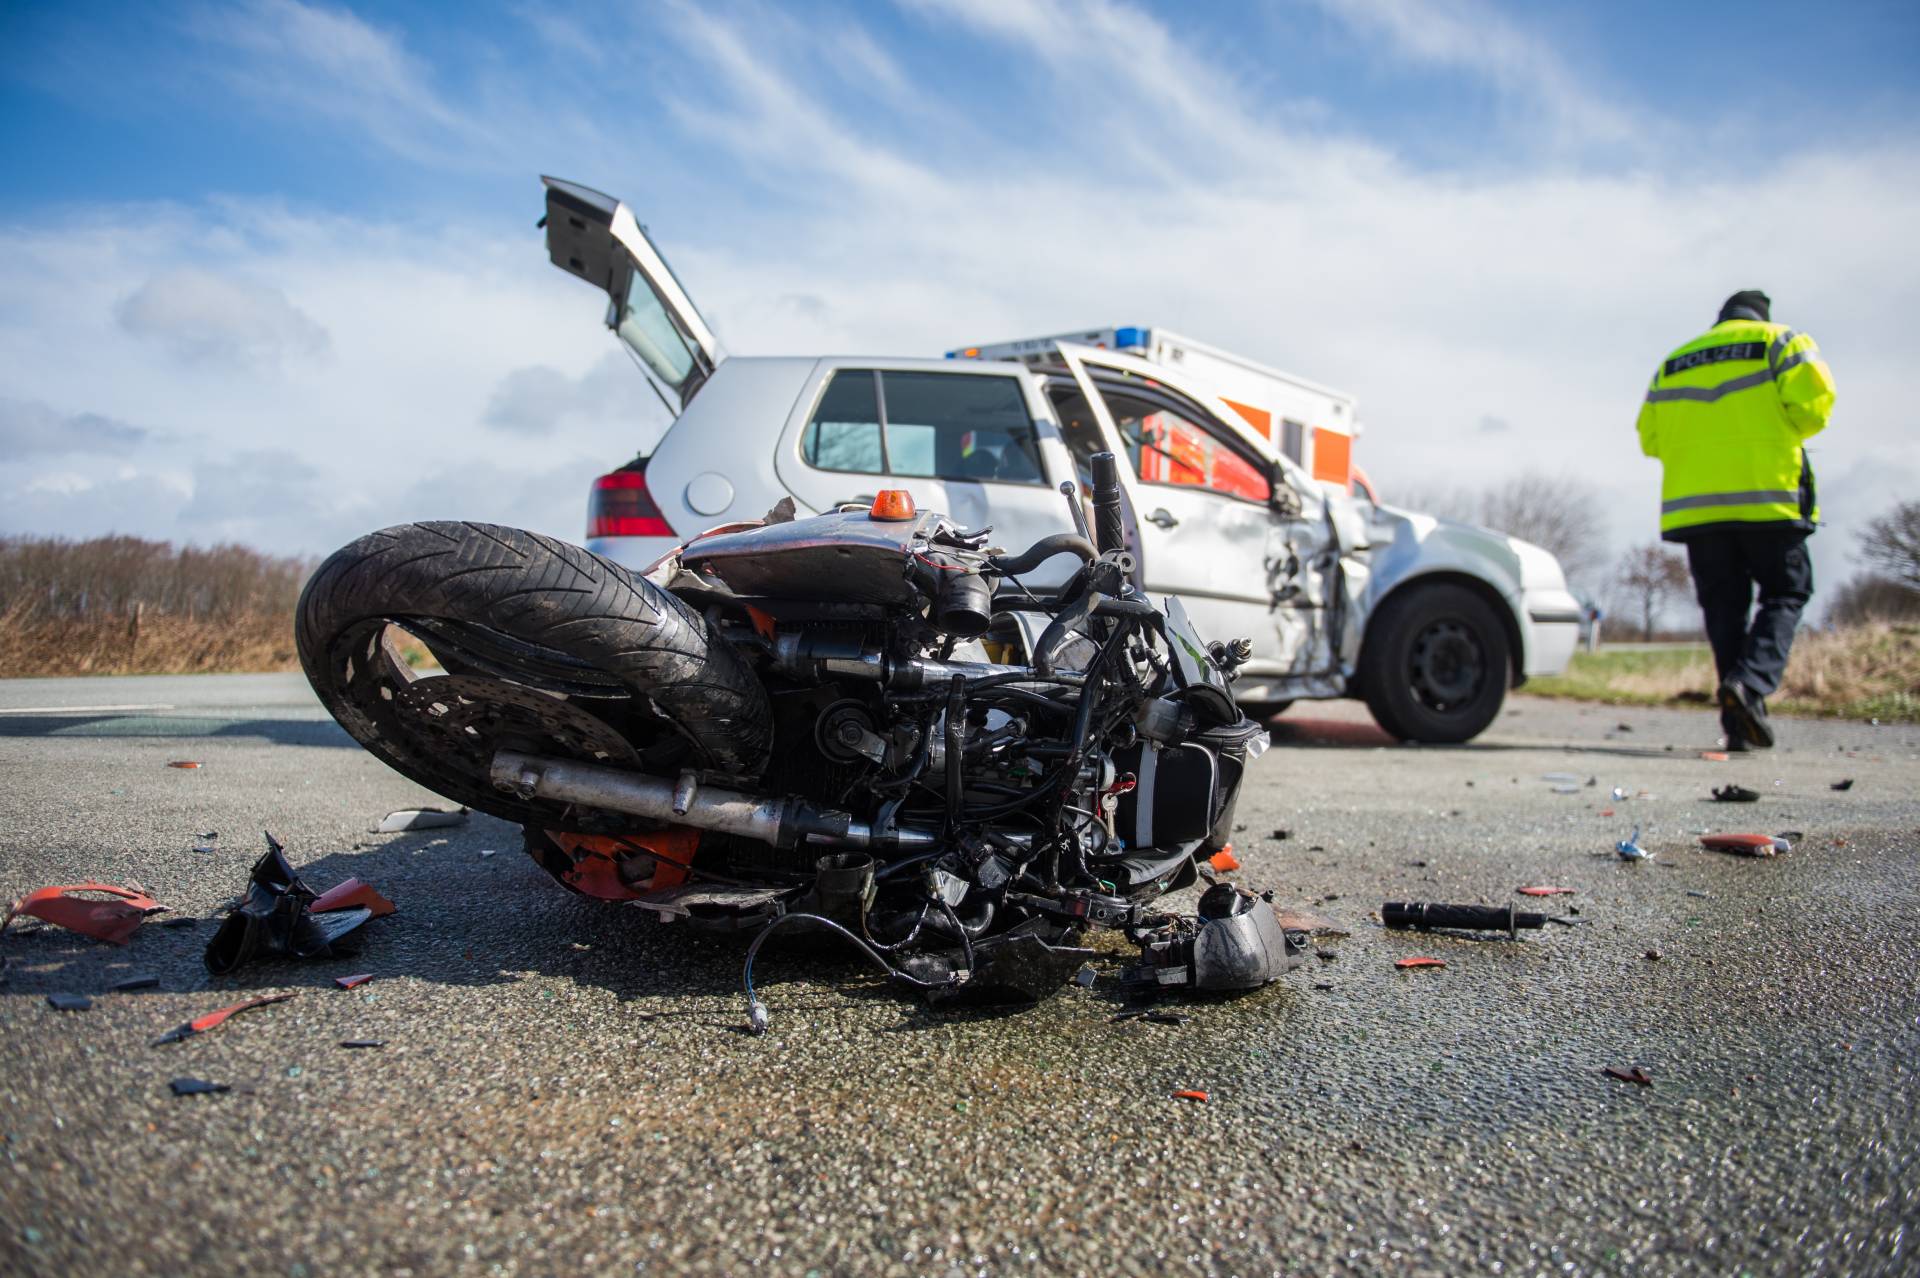 Need an Atlanta Motorcycle Accident Lawyer to go up against the insurance companies. Contact us today!